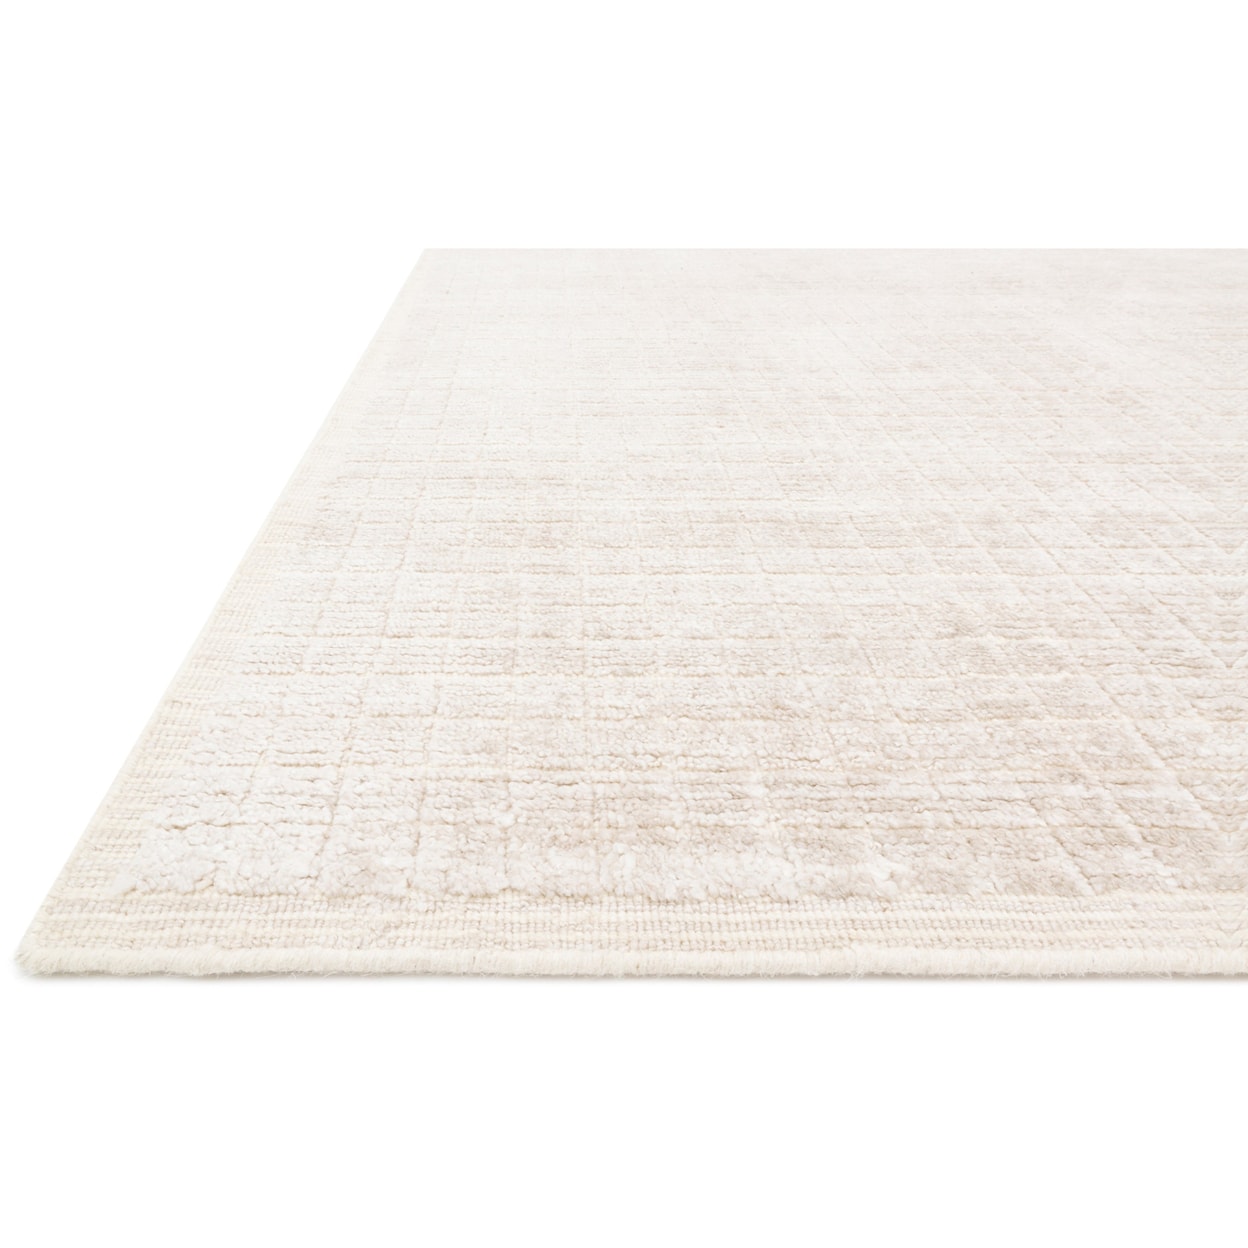 Reeds Rugs Beverly 2'6" x 8'6" Natural Rug